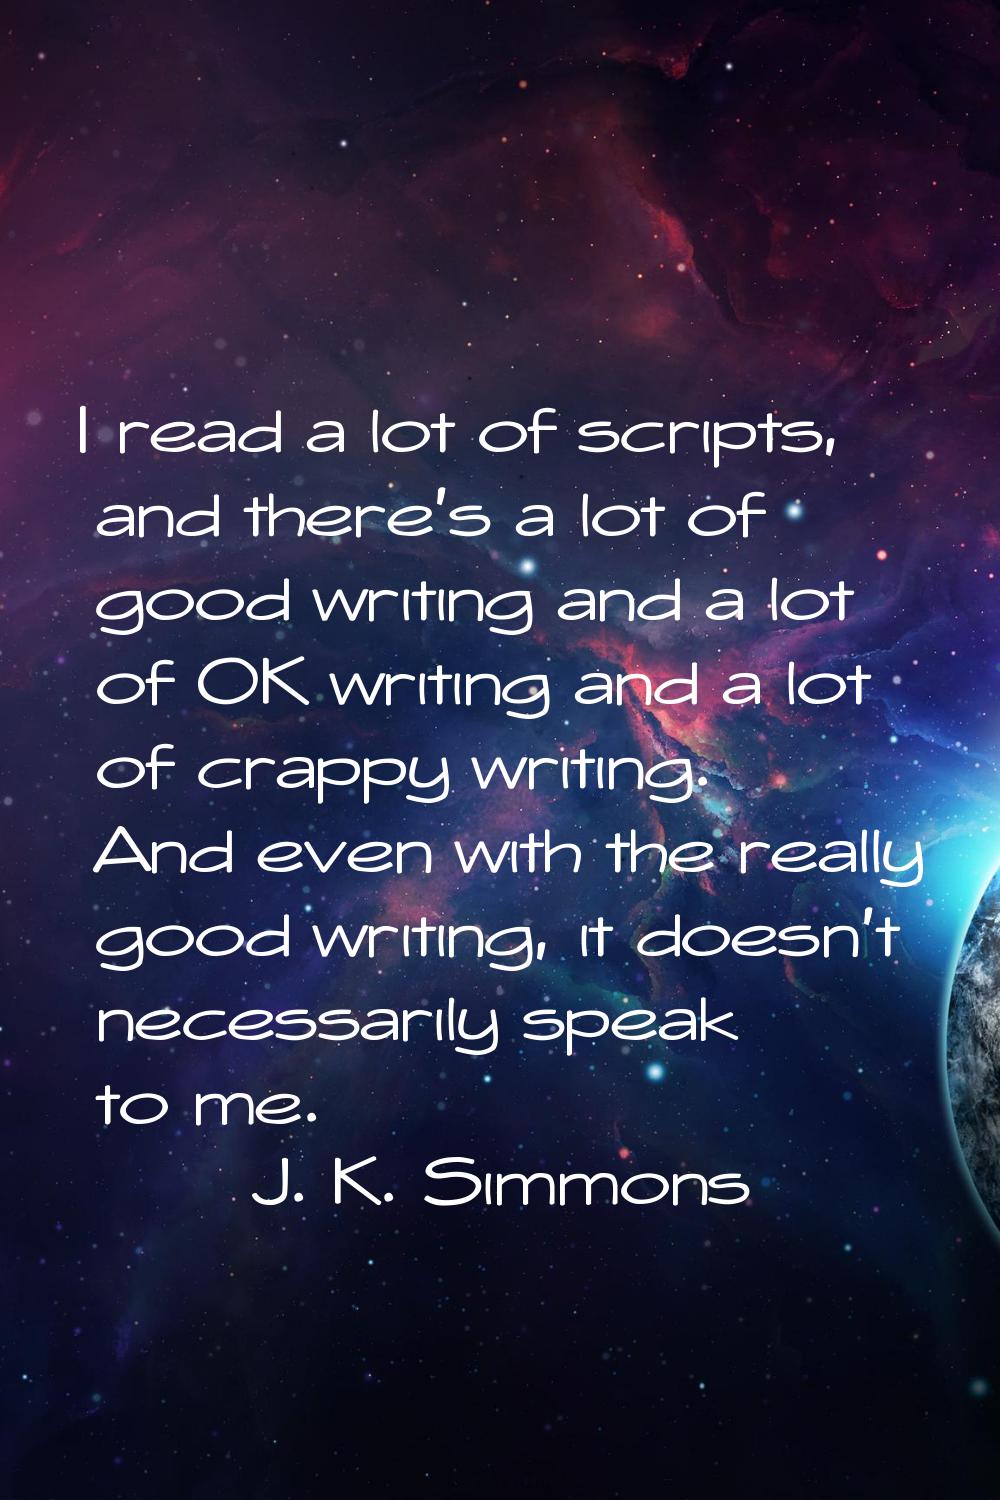 I read a lot of scripts, and there's a lot of good writing and a lot of OK writing and a lot of cra